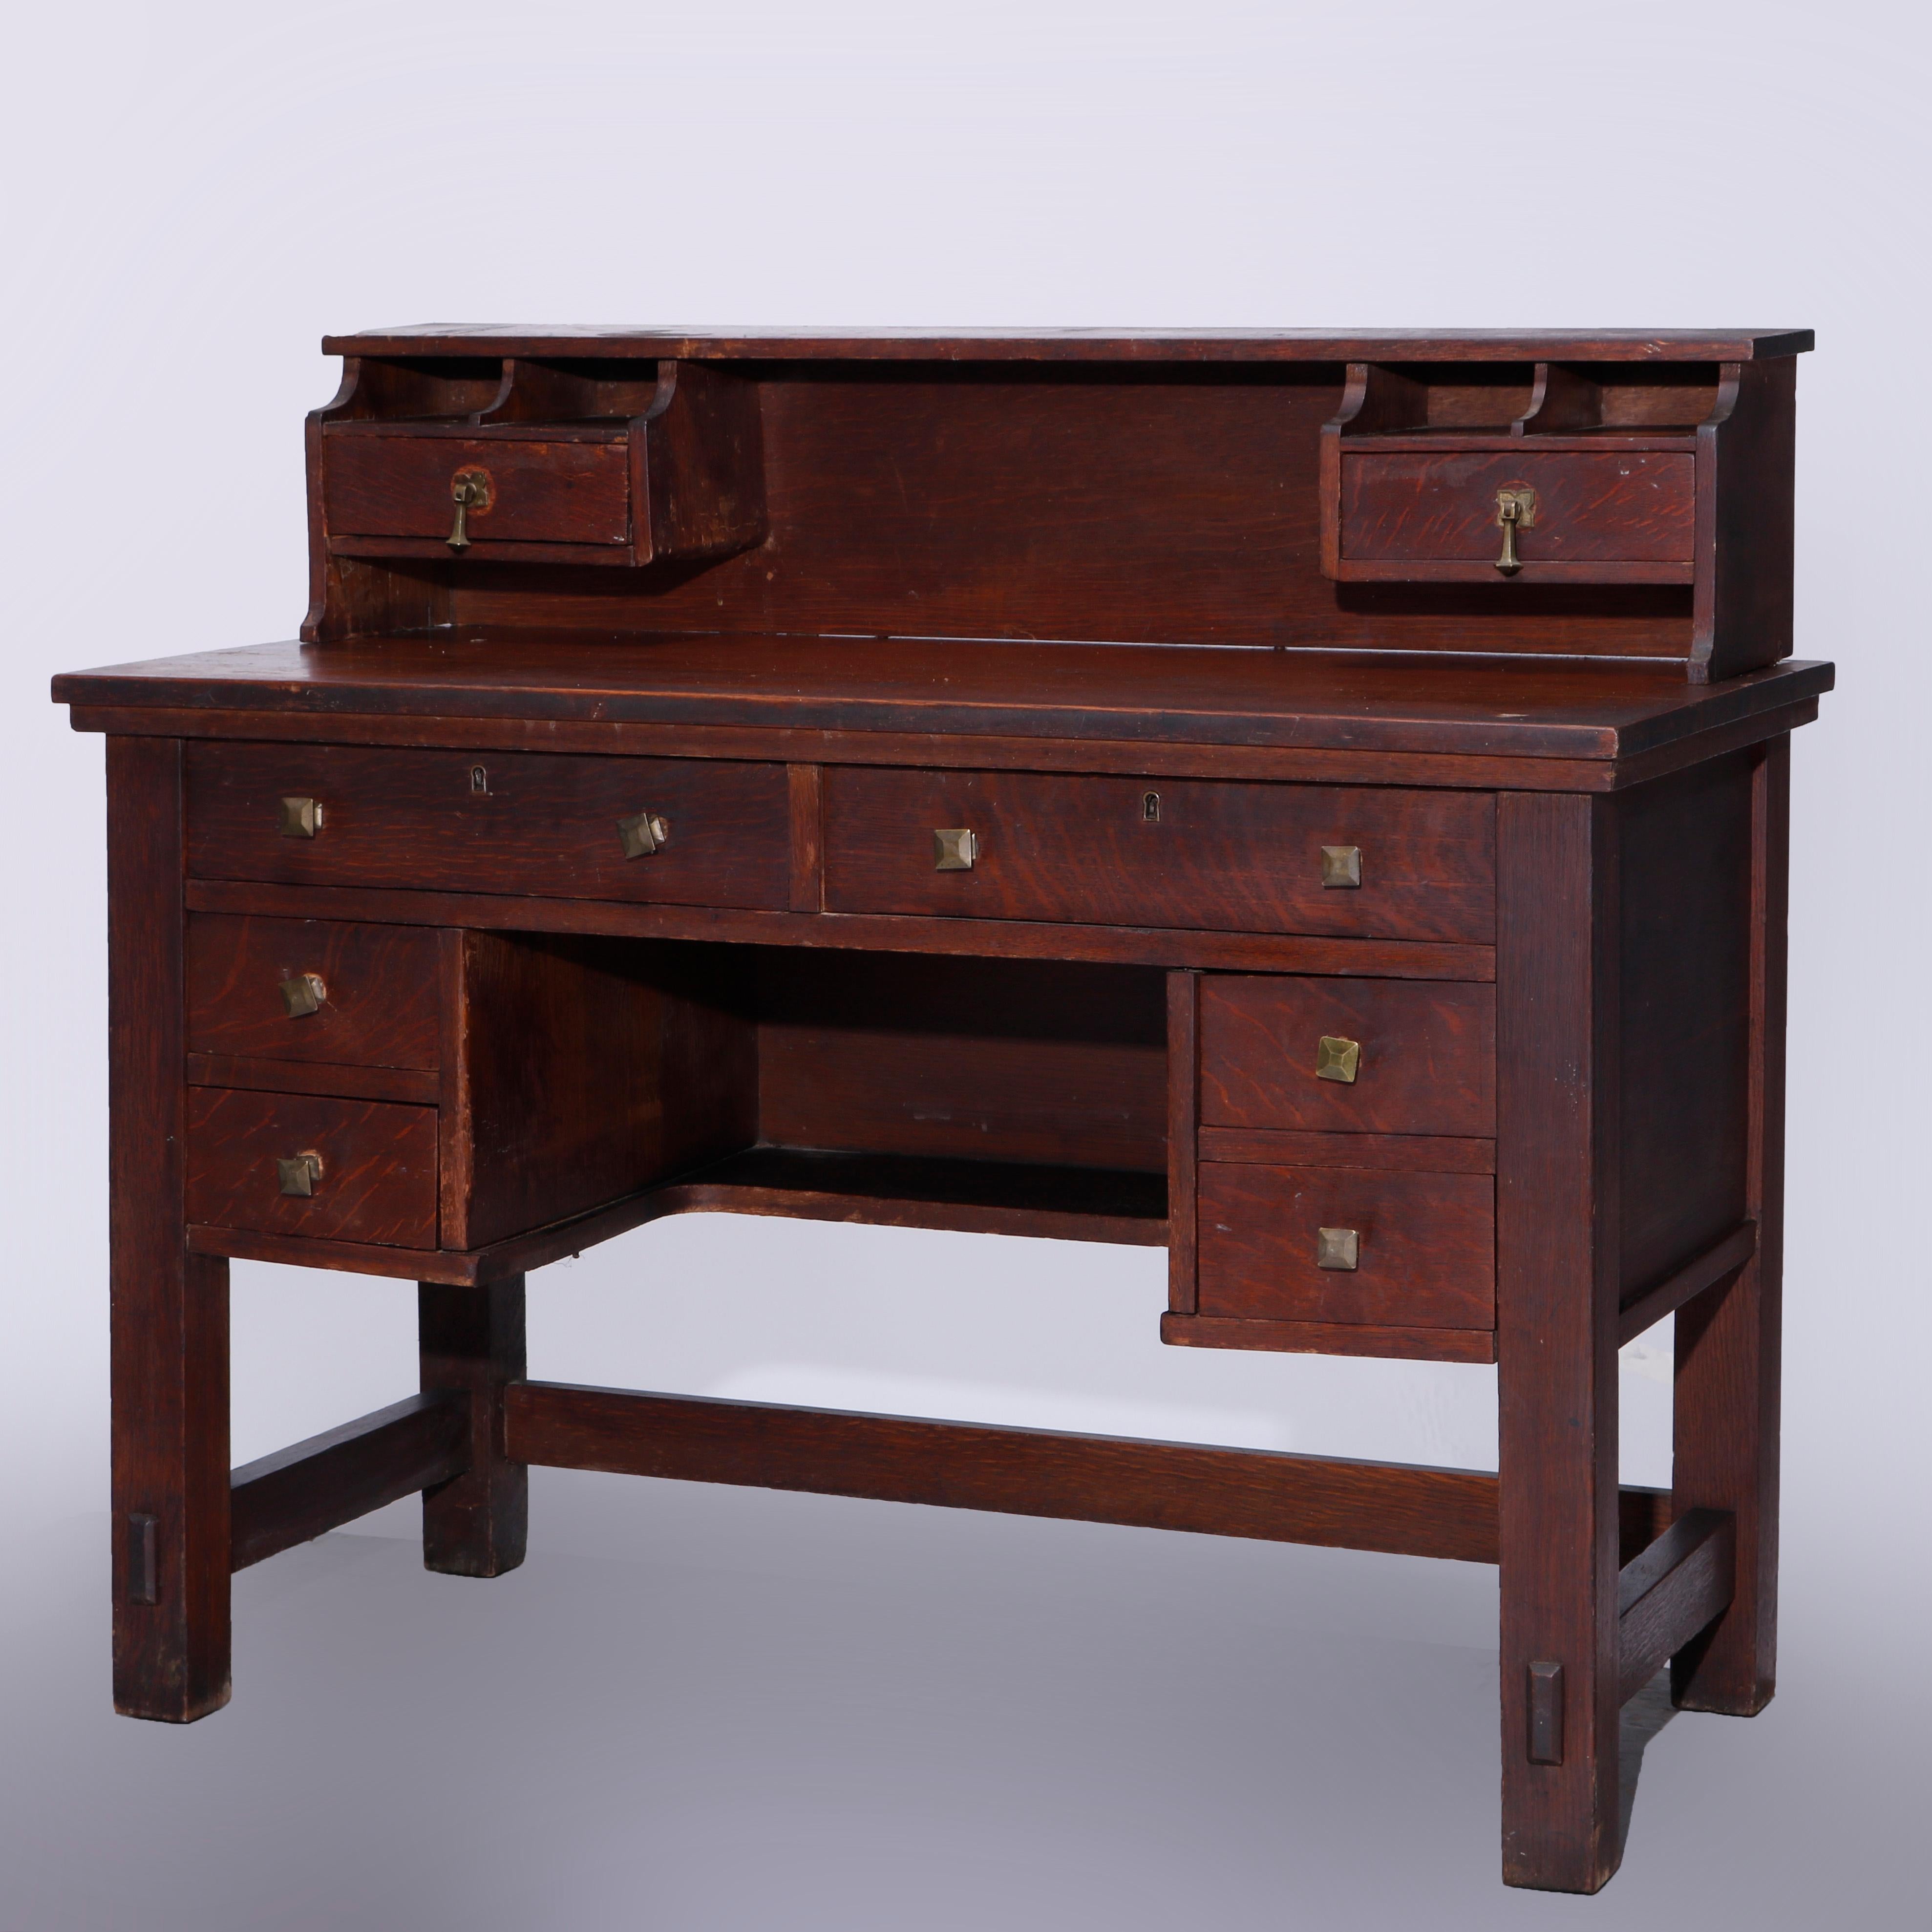 An antique Arts & Crafts postmaster desk offers oak construction in kneehole form with upper having storage drawers and pigeon holes over desk with central drawer and flanking drawer towers, raised on square and straight legs, c1900

Measures -